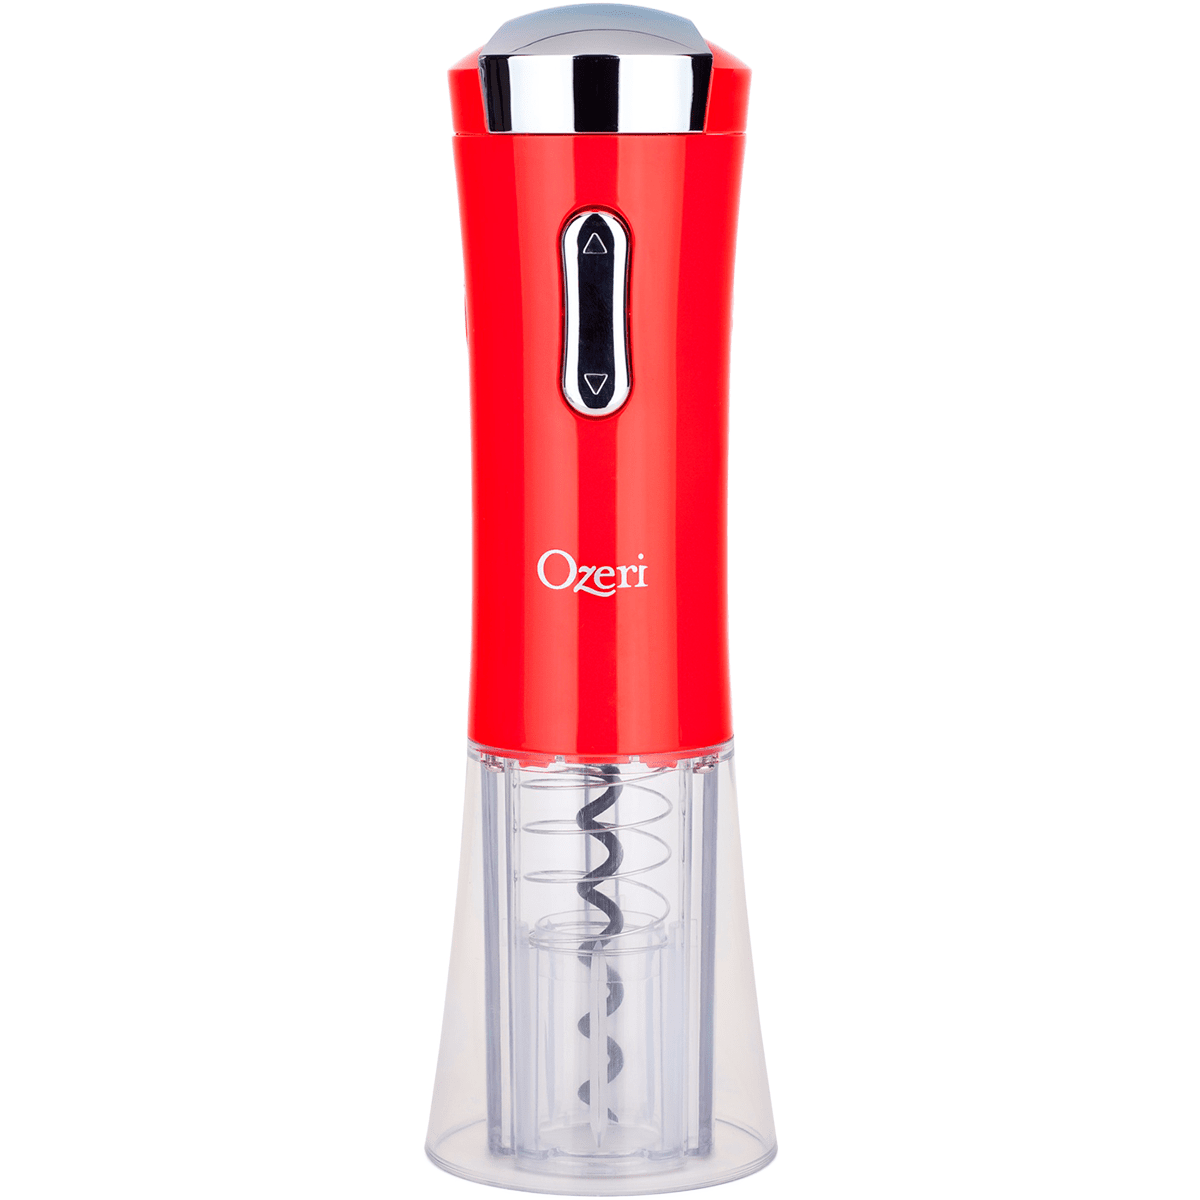 Ozeri Nouveaux II Electric Wine Bottle Opener - Red (OW02A-5)